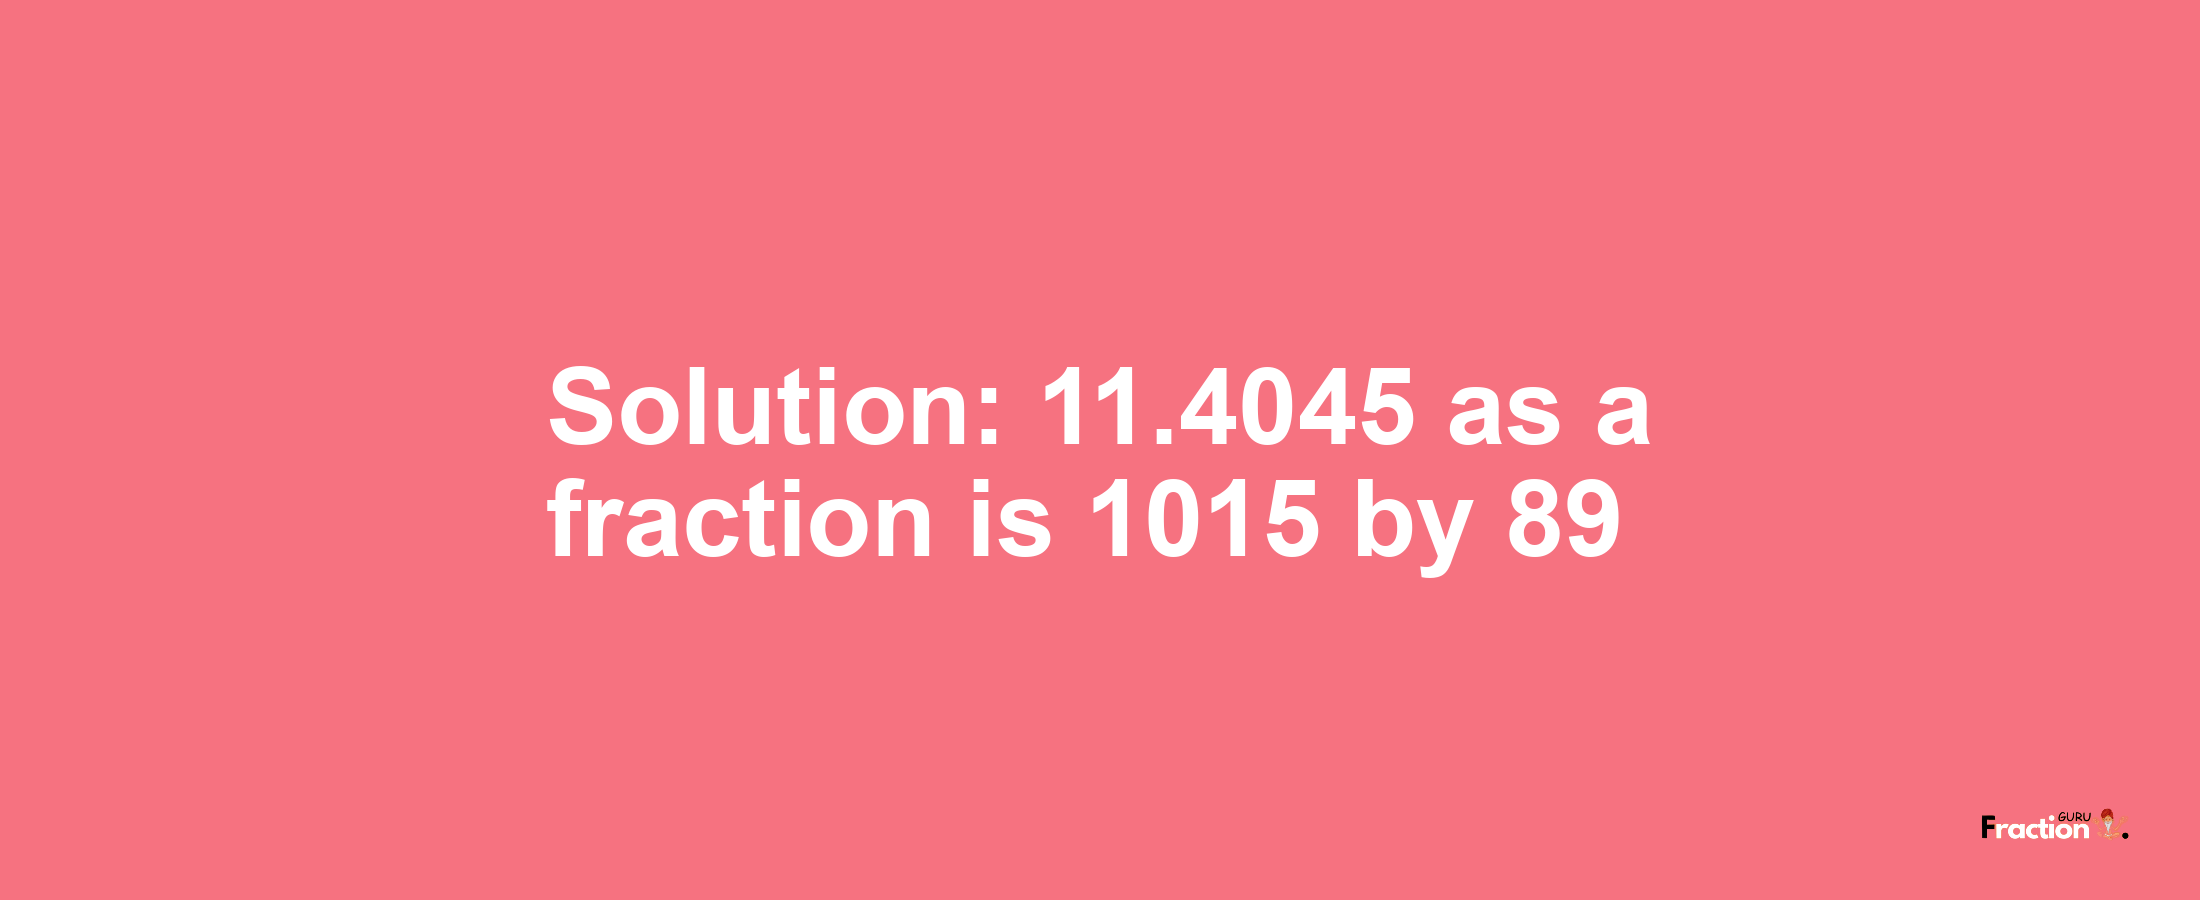 Solution:11.4045 as a fraction is 1015/89